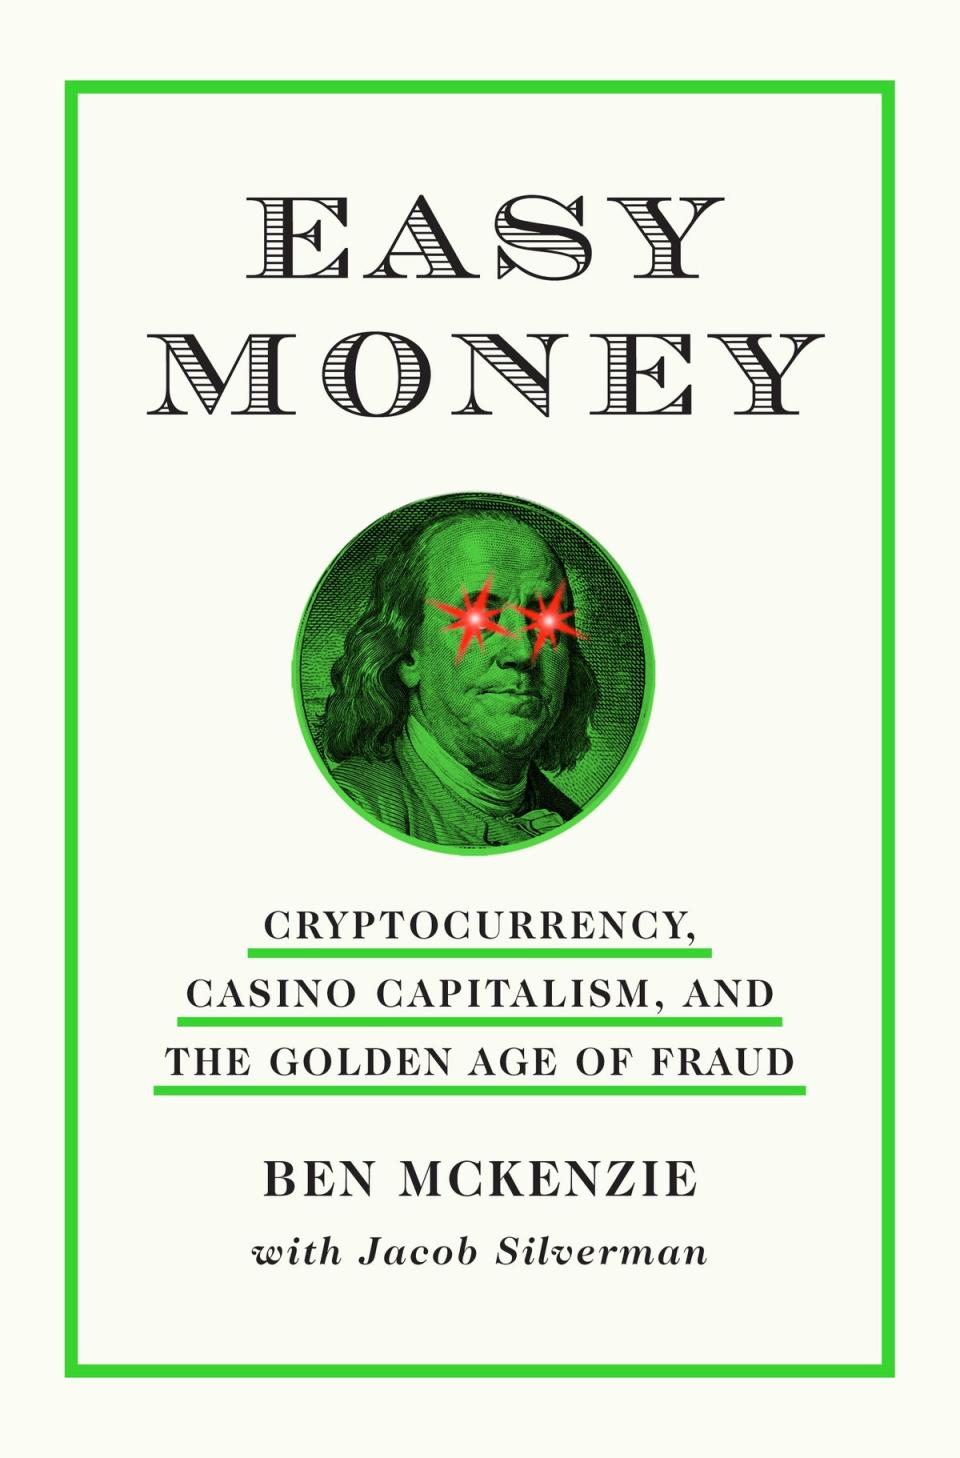 Easy Money: Cryptocurrency, Casino Capitalism, and the Golden Age of Fraud, written by Ben McKenzie and Jacob Silverman (Supplied)